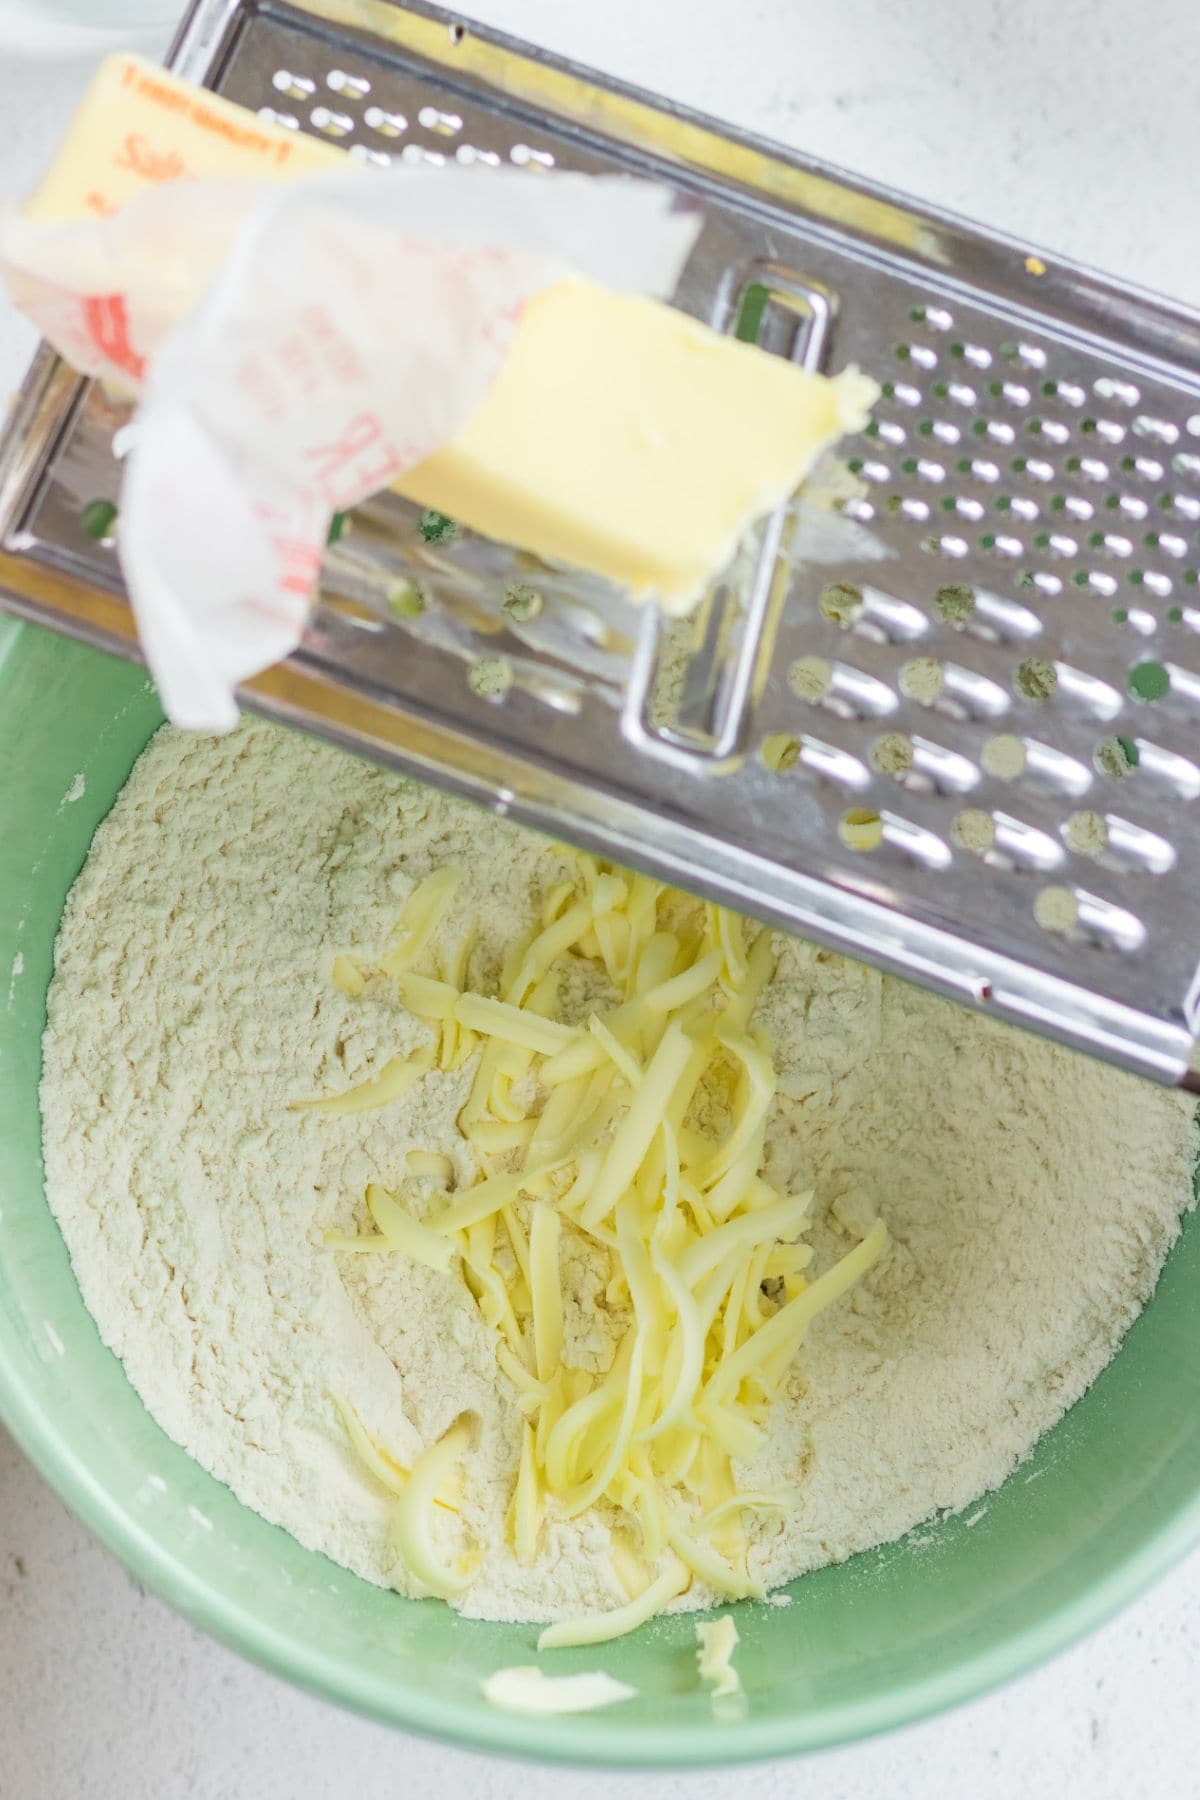 Cold butter being grated into a bowl of flour.